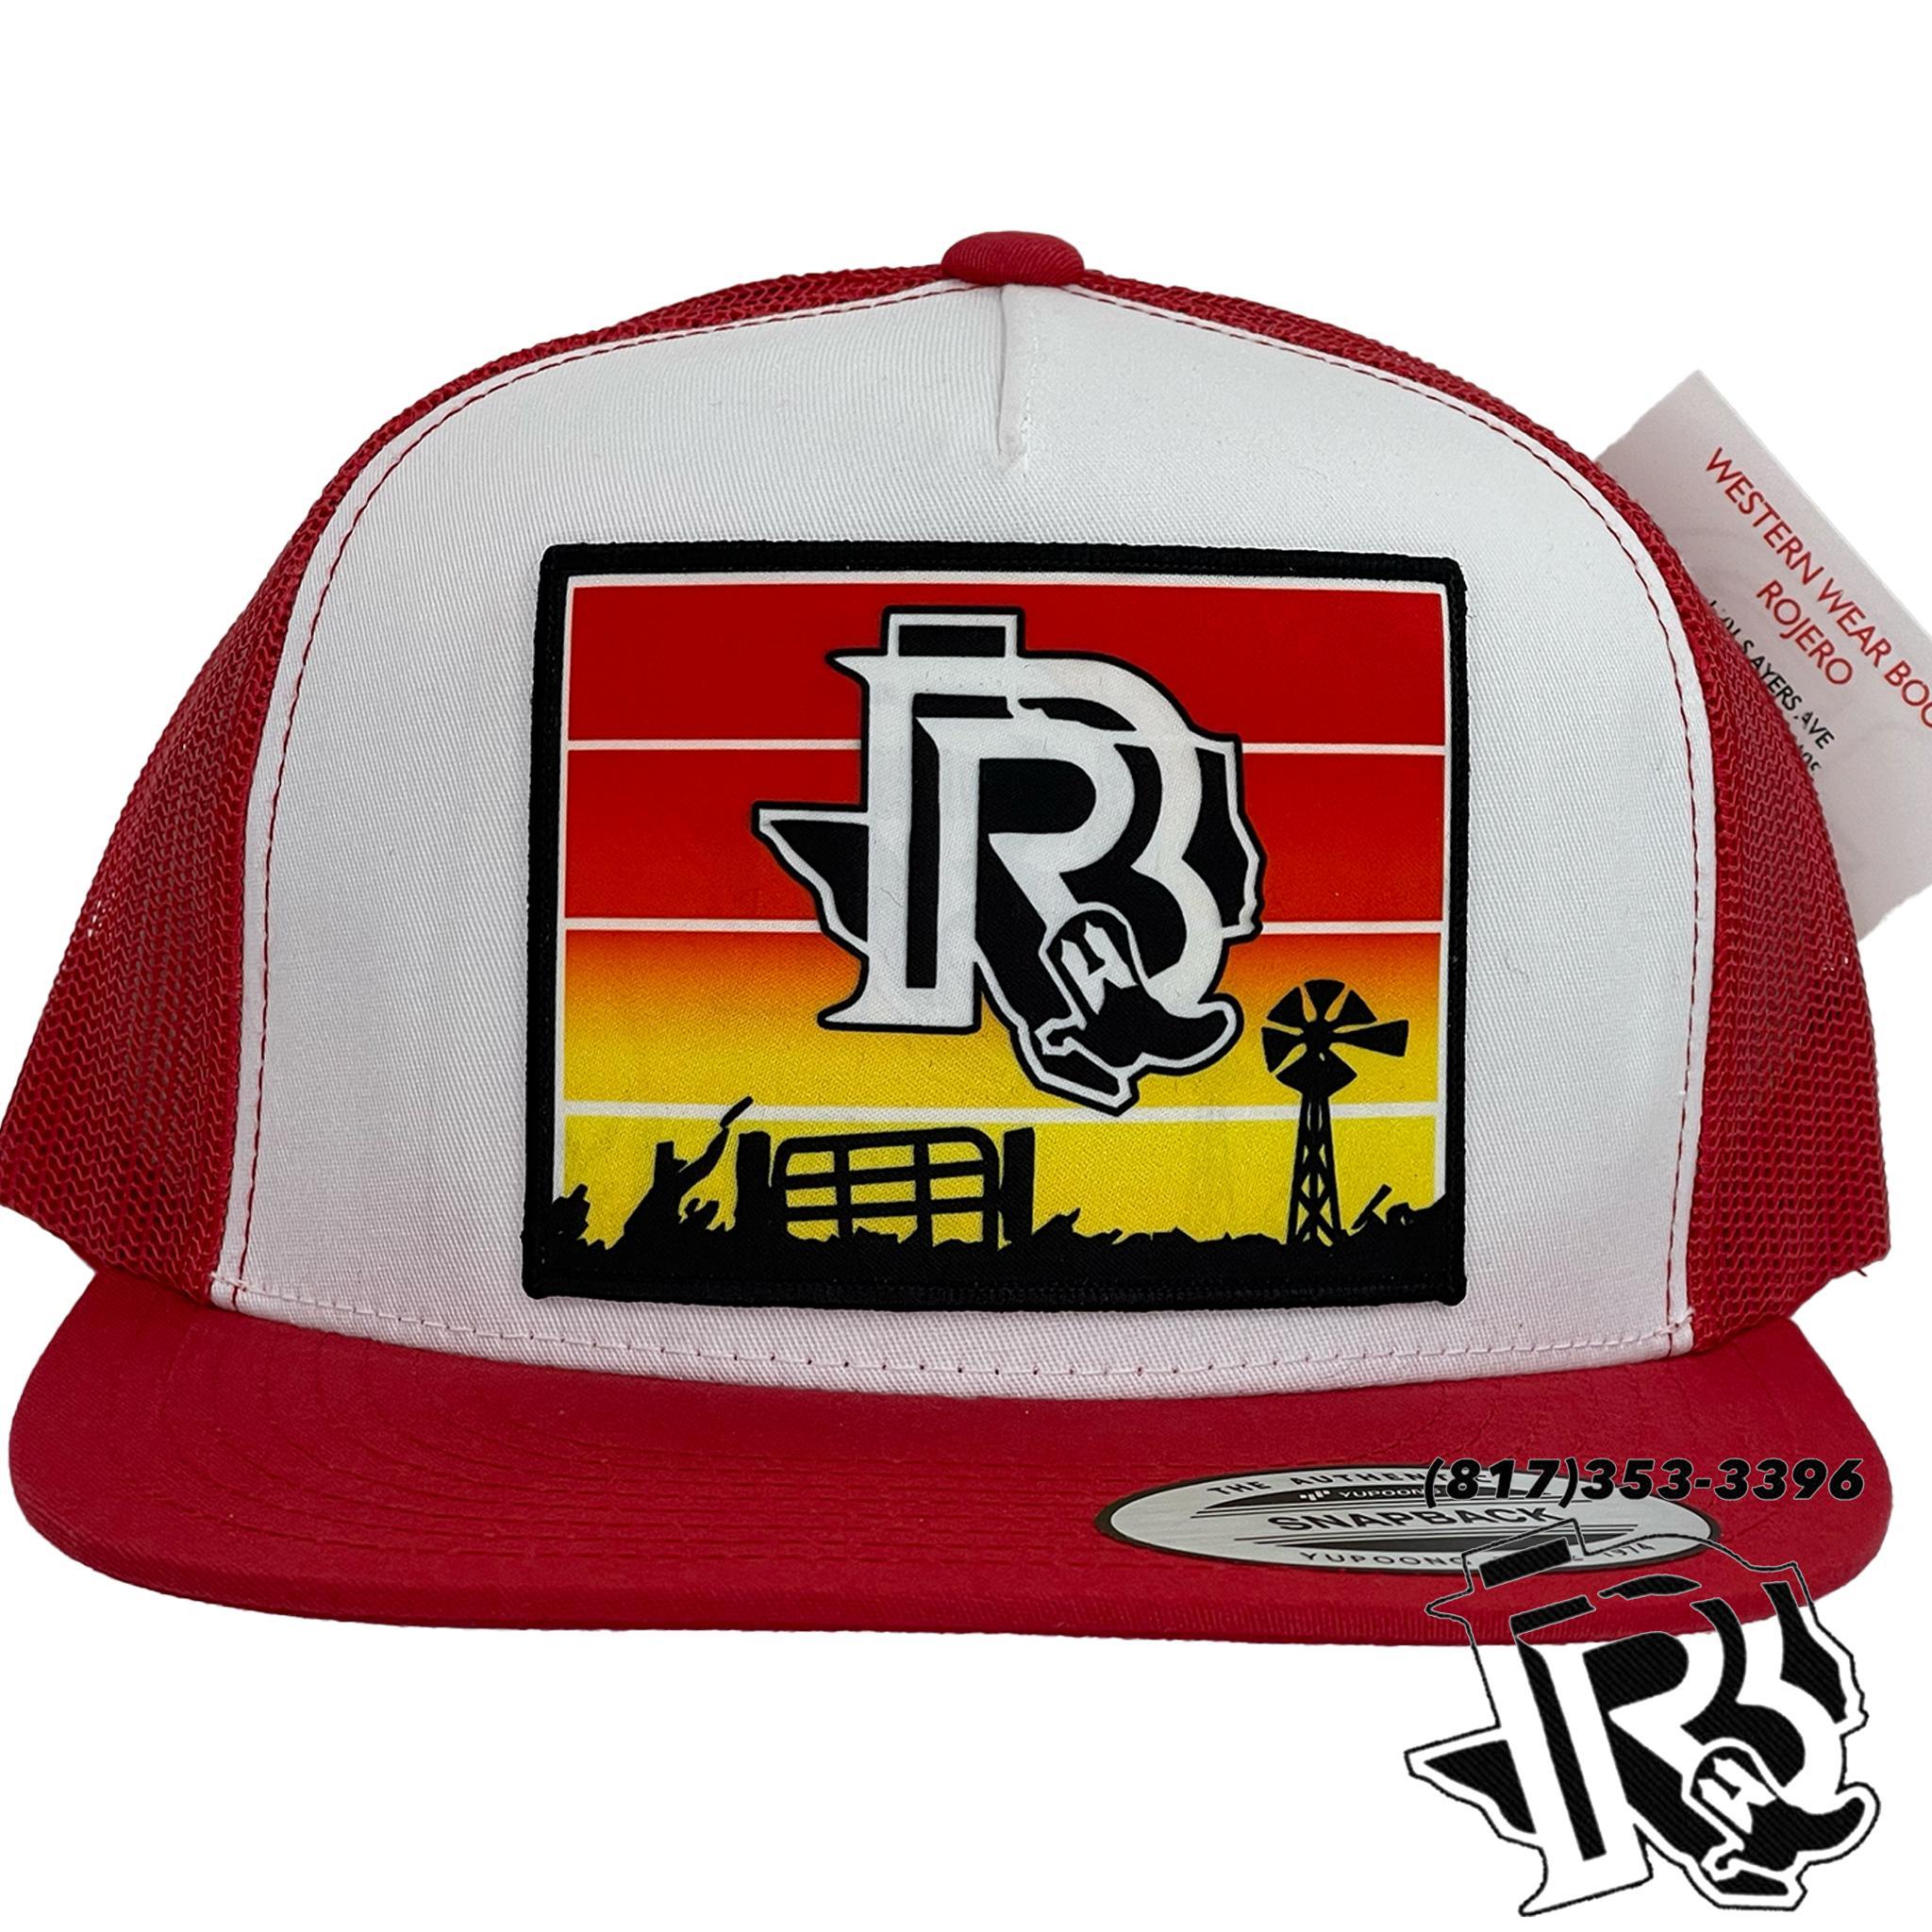 BR TEXAS SUNSET EDITION: RED/WHITE/RED CAP